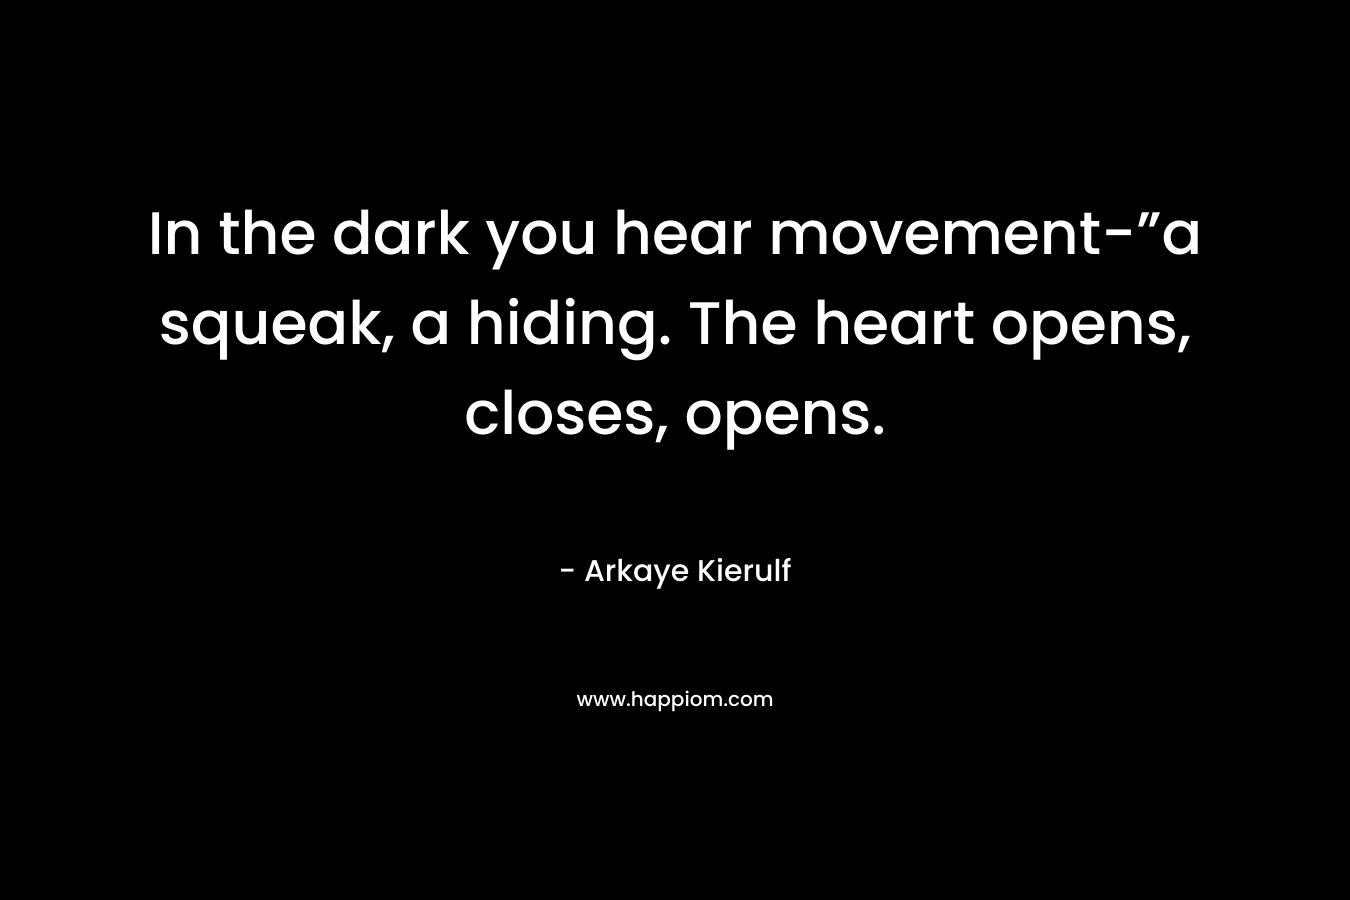 In the dark you hear movement-”a squeak, a hiding. The heart opens, closes, opens.